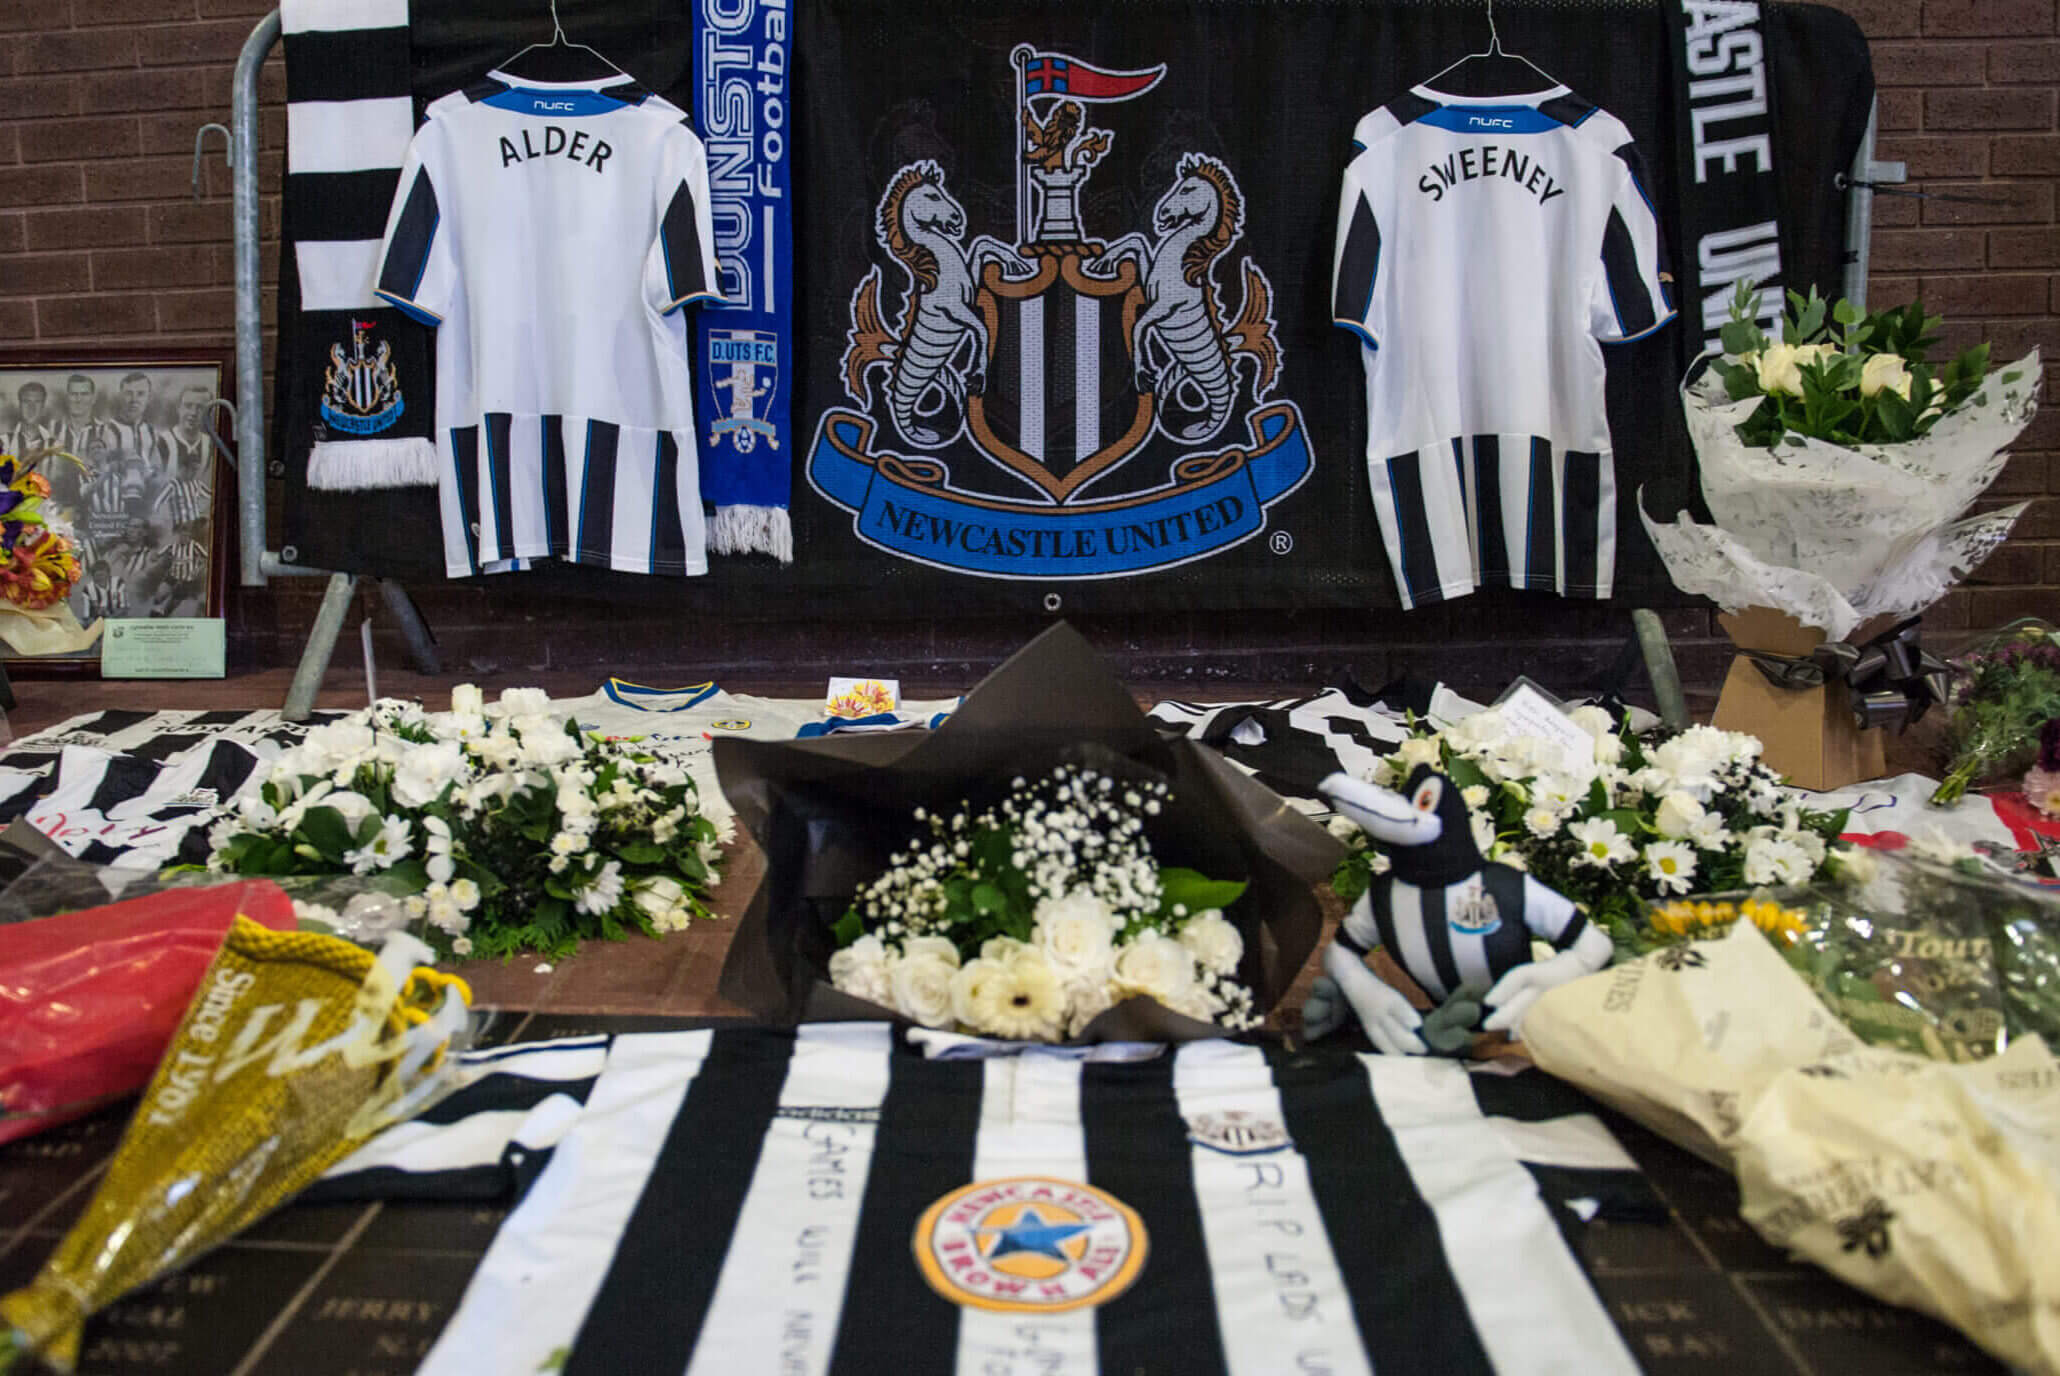 Ten years on: Remembering the football fans who died in the MH17 plane crash